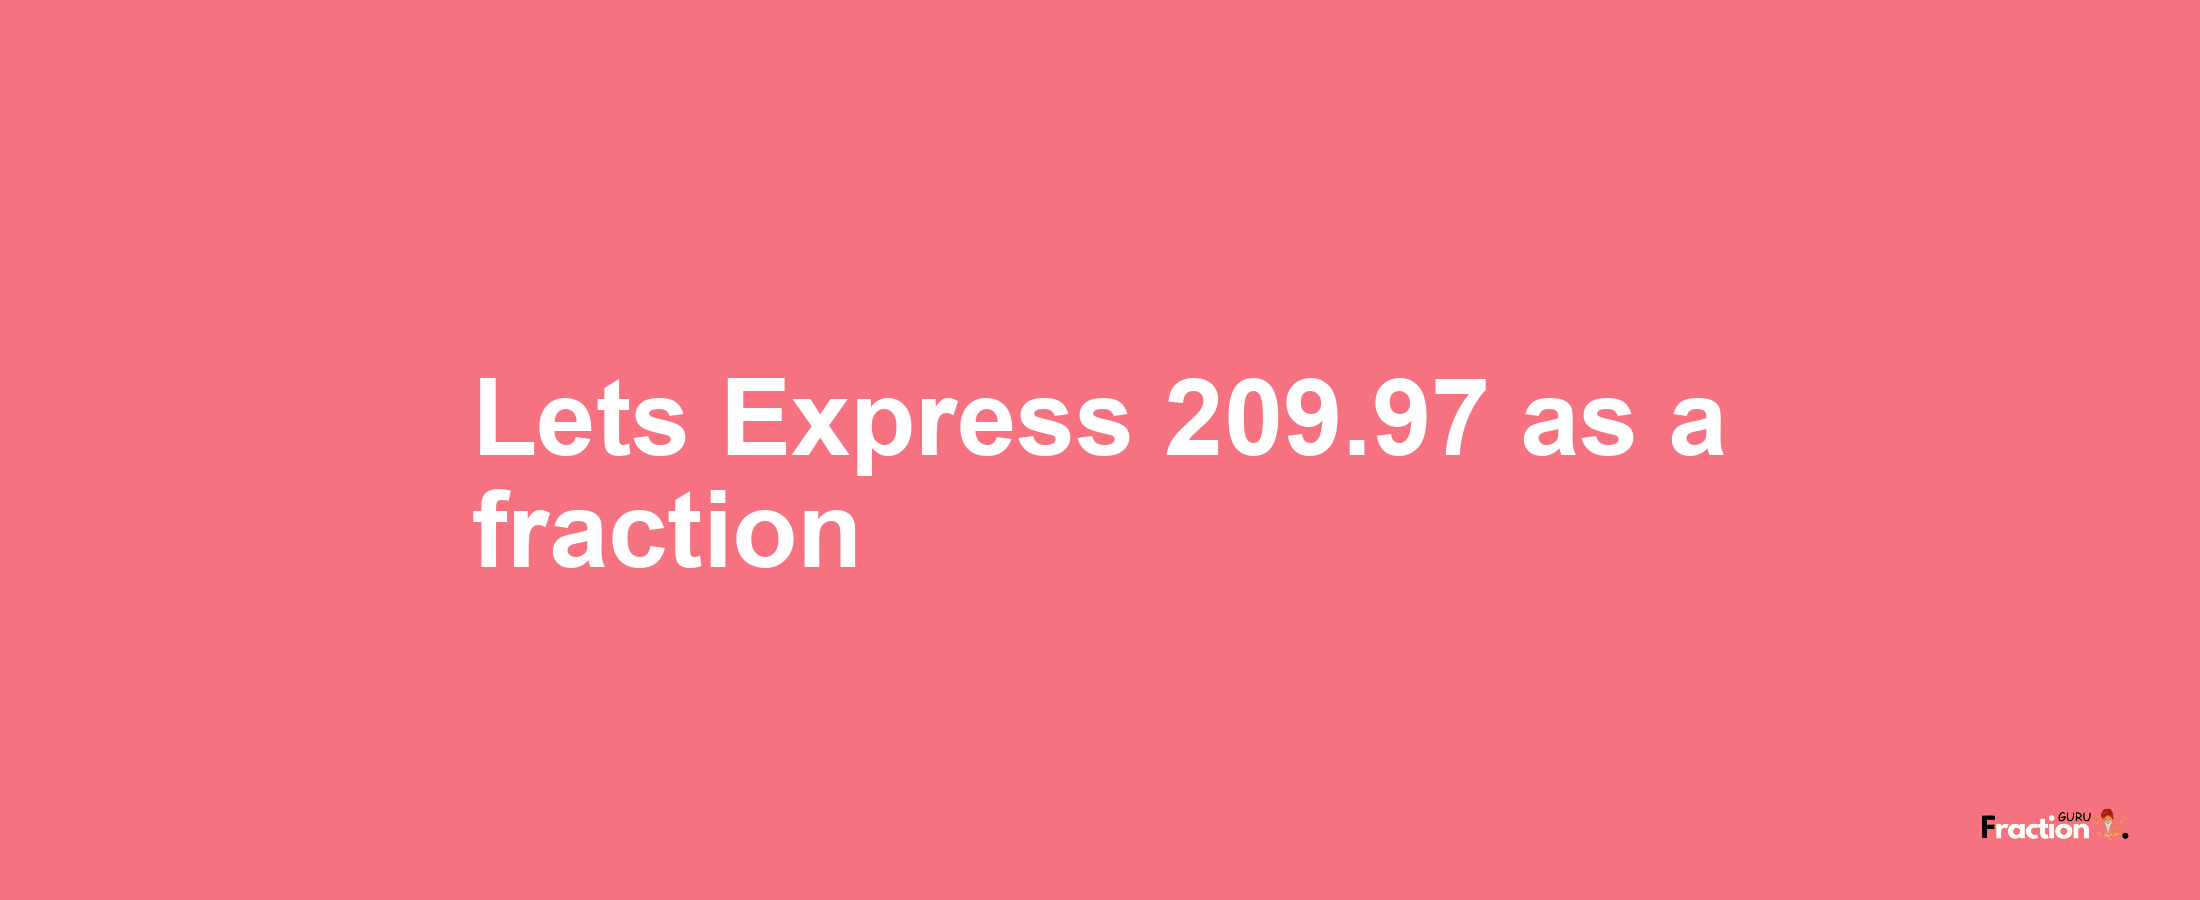 Lets Express 209.97 as afraction